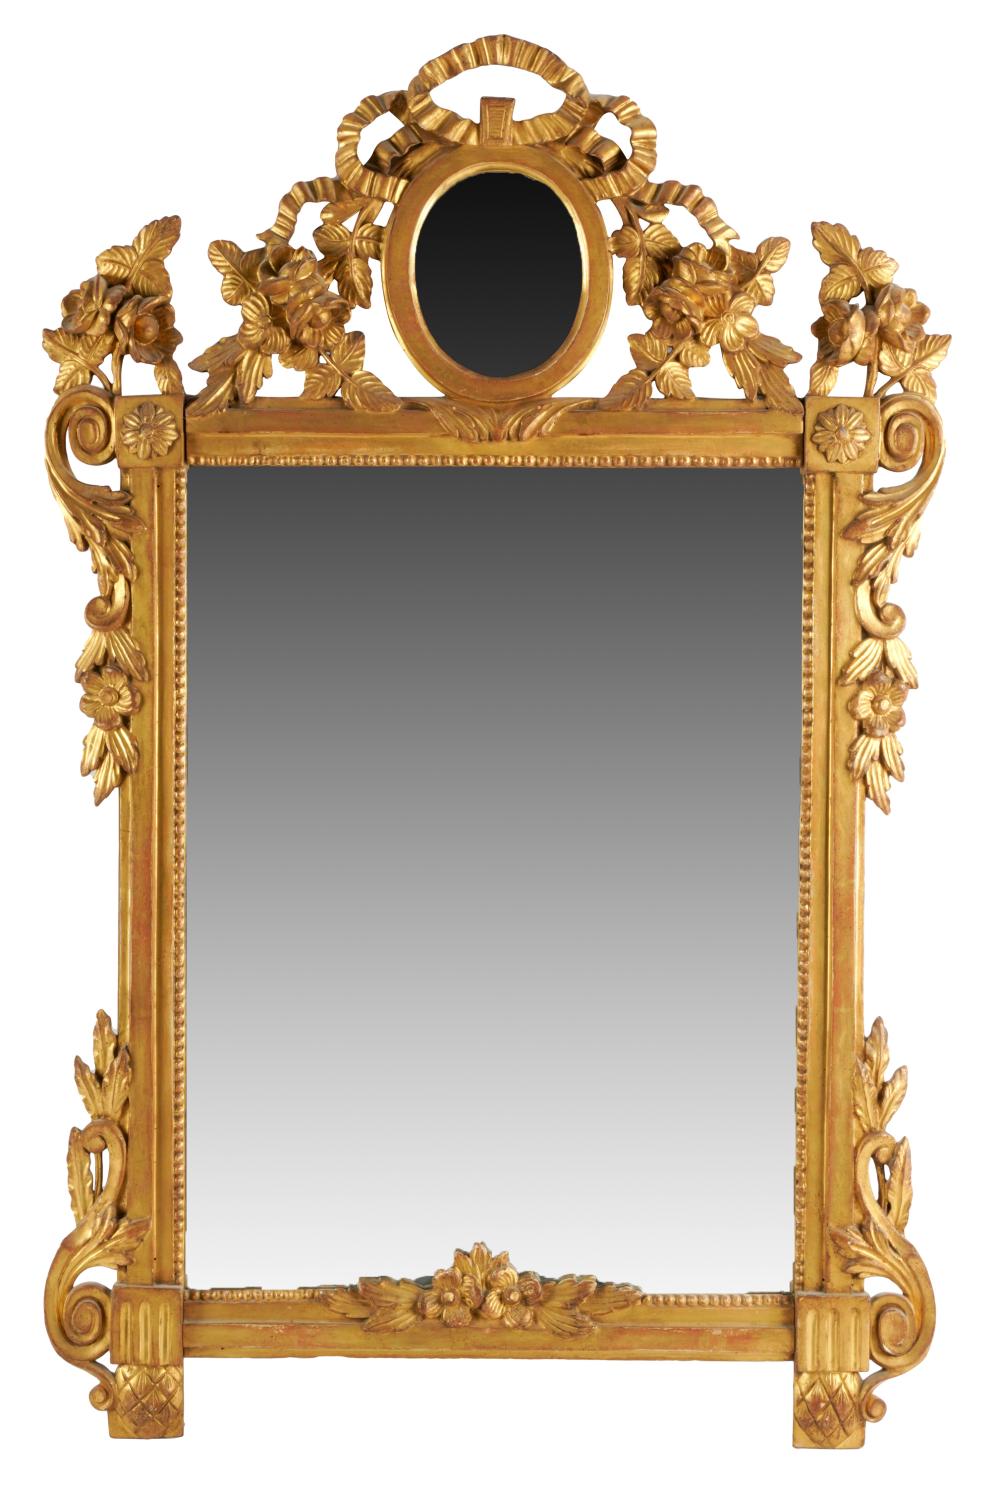 CARVED & GILT WALL MIRROR20th century;